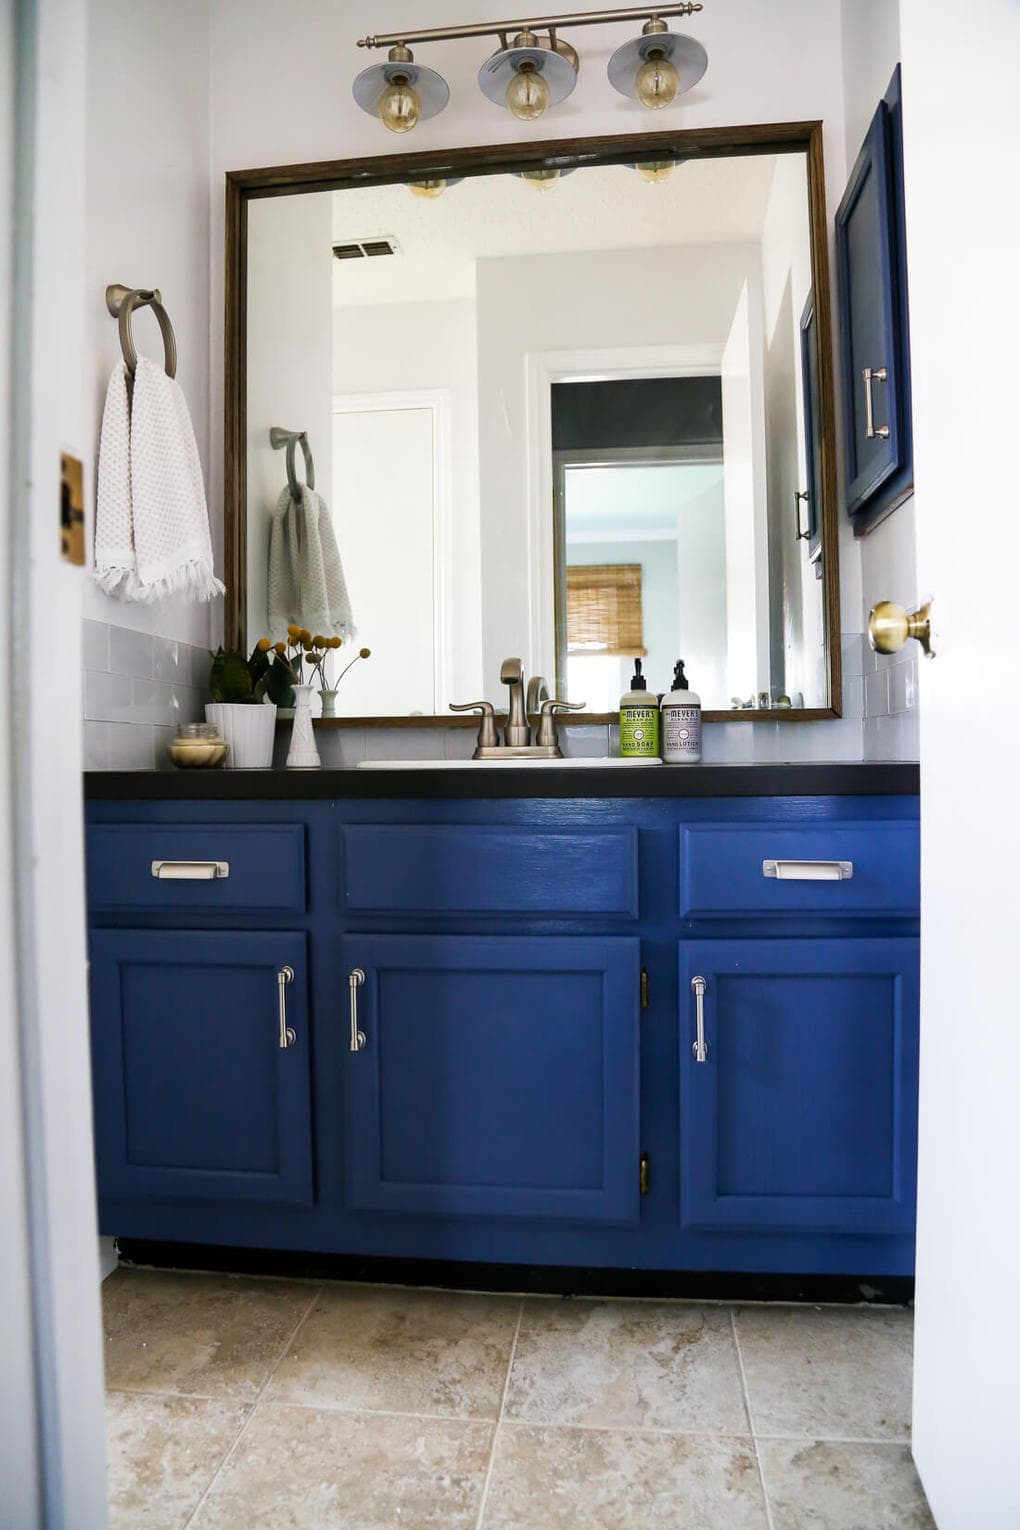 A DIY modern, serene bathroom renovation that can be completed in a weekend. Great ideas for how to upgrade an ugly bathroom and make it look like new without a ton of time or money. 